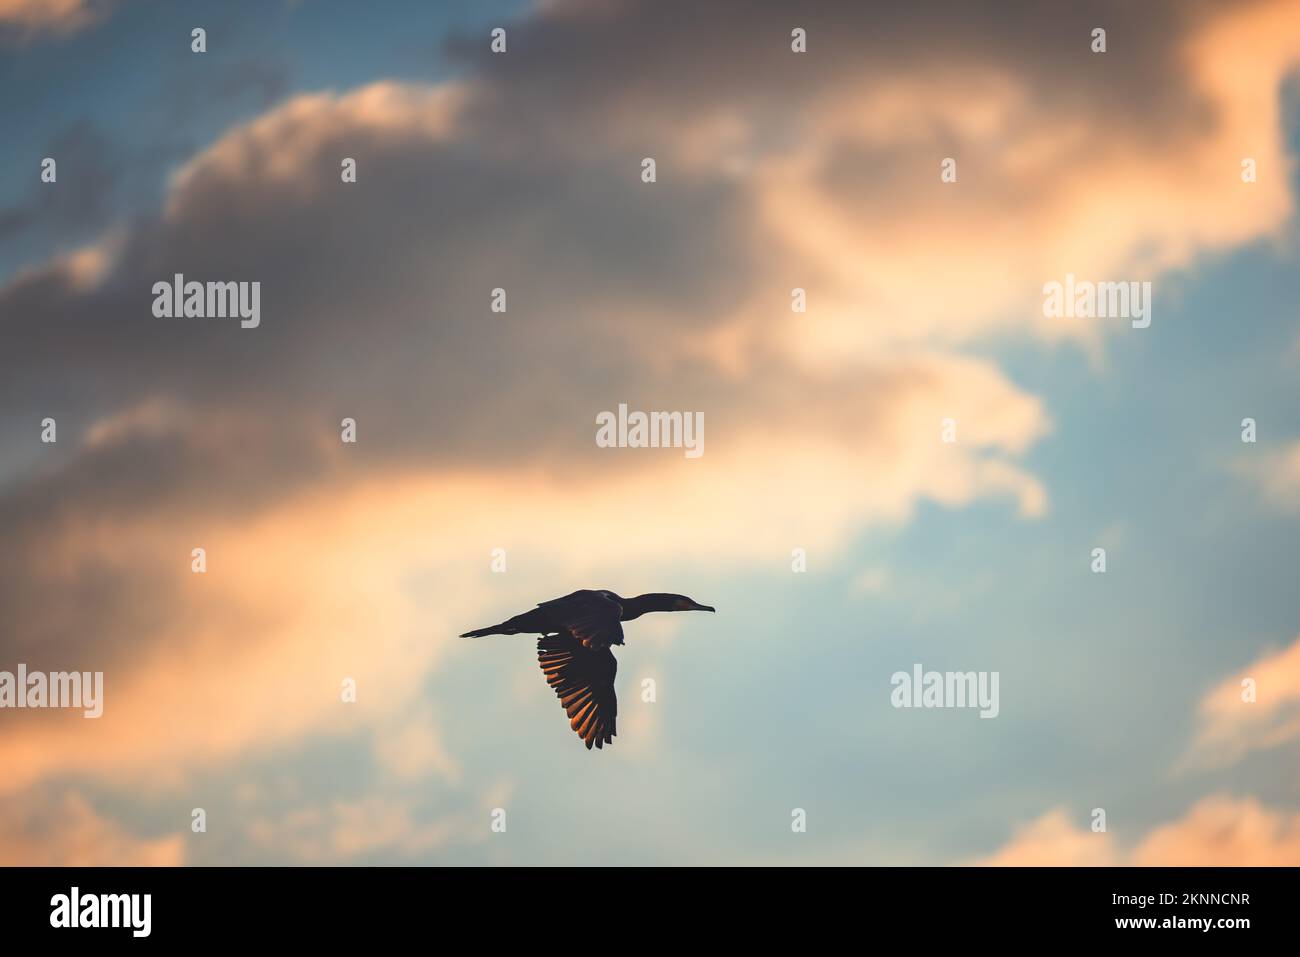 Silhouette of flying bird, cormorant flying in the sky Stock Photo